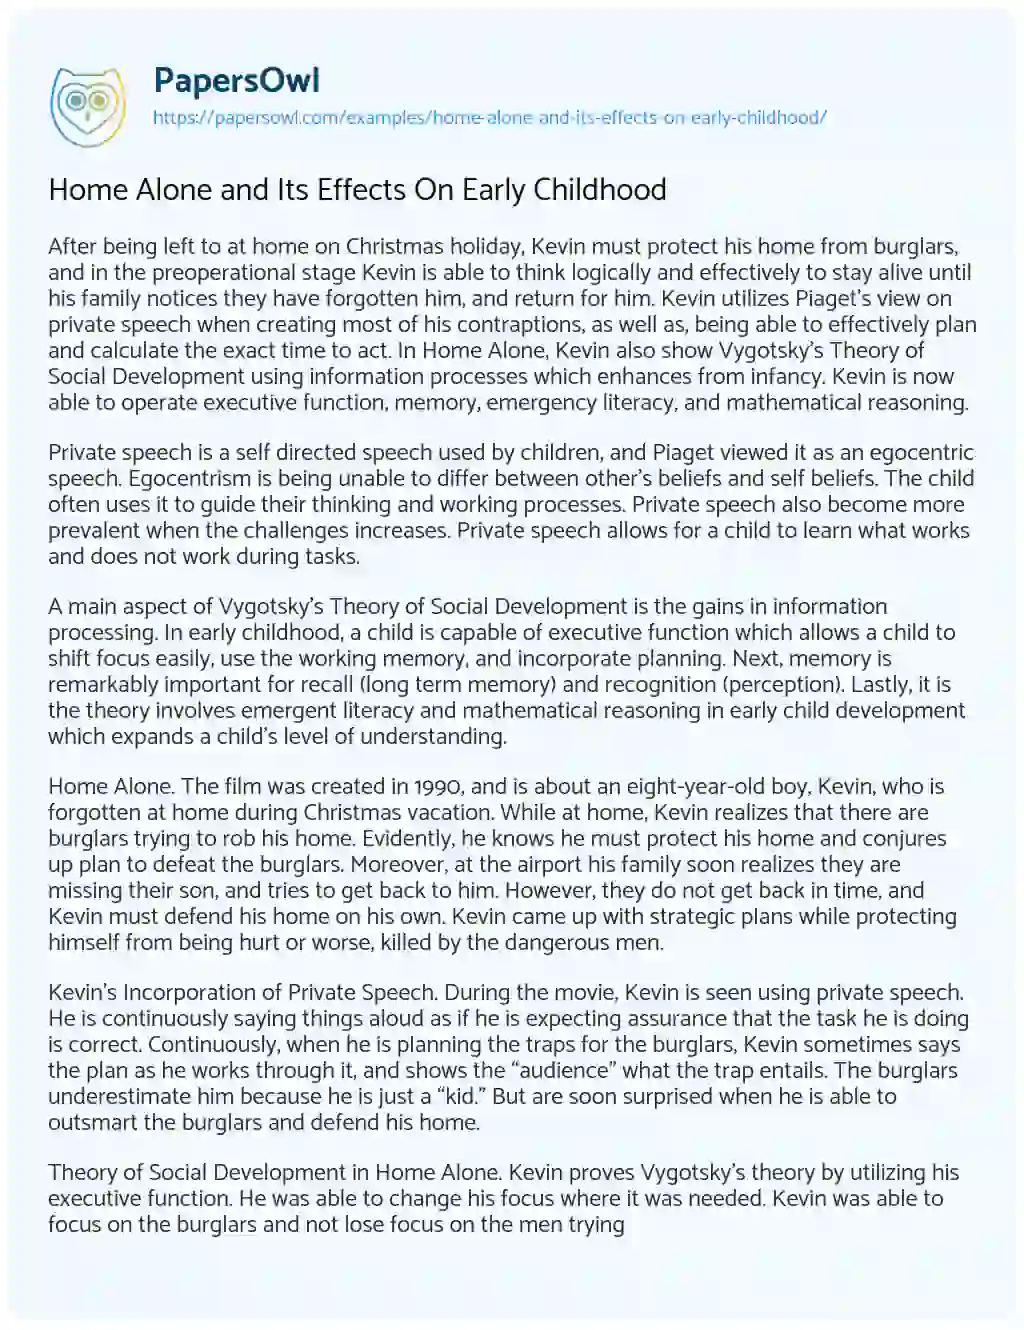 Essay on Home Alone and its Effects on Early Childhood